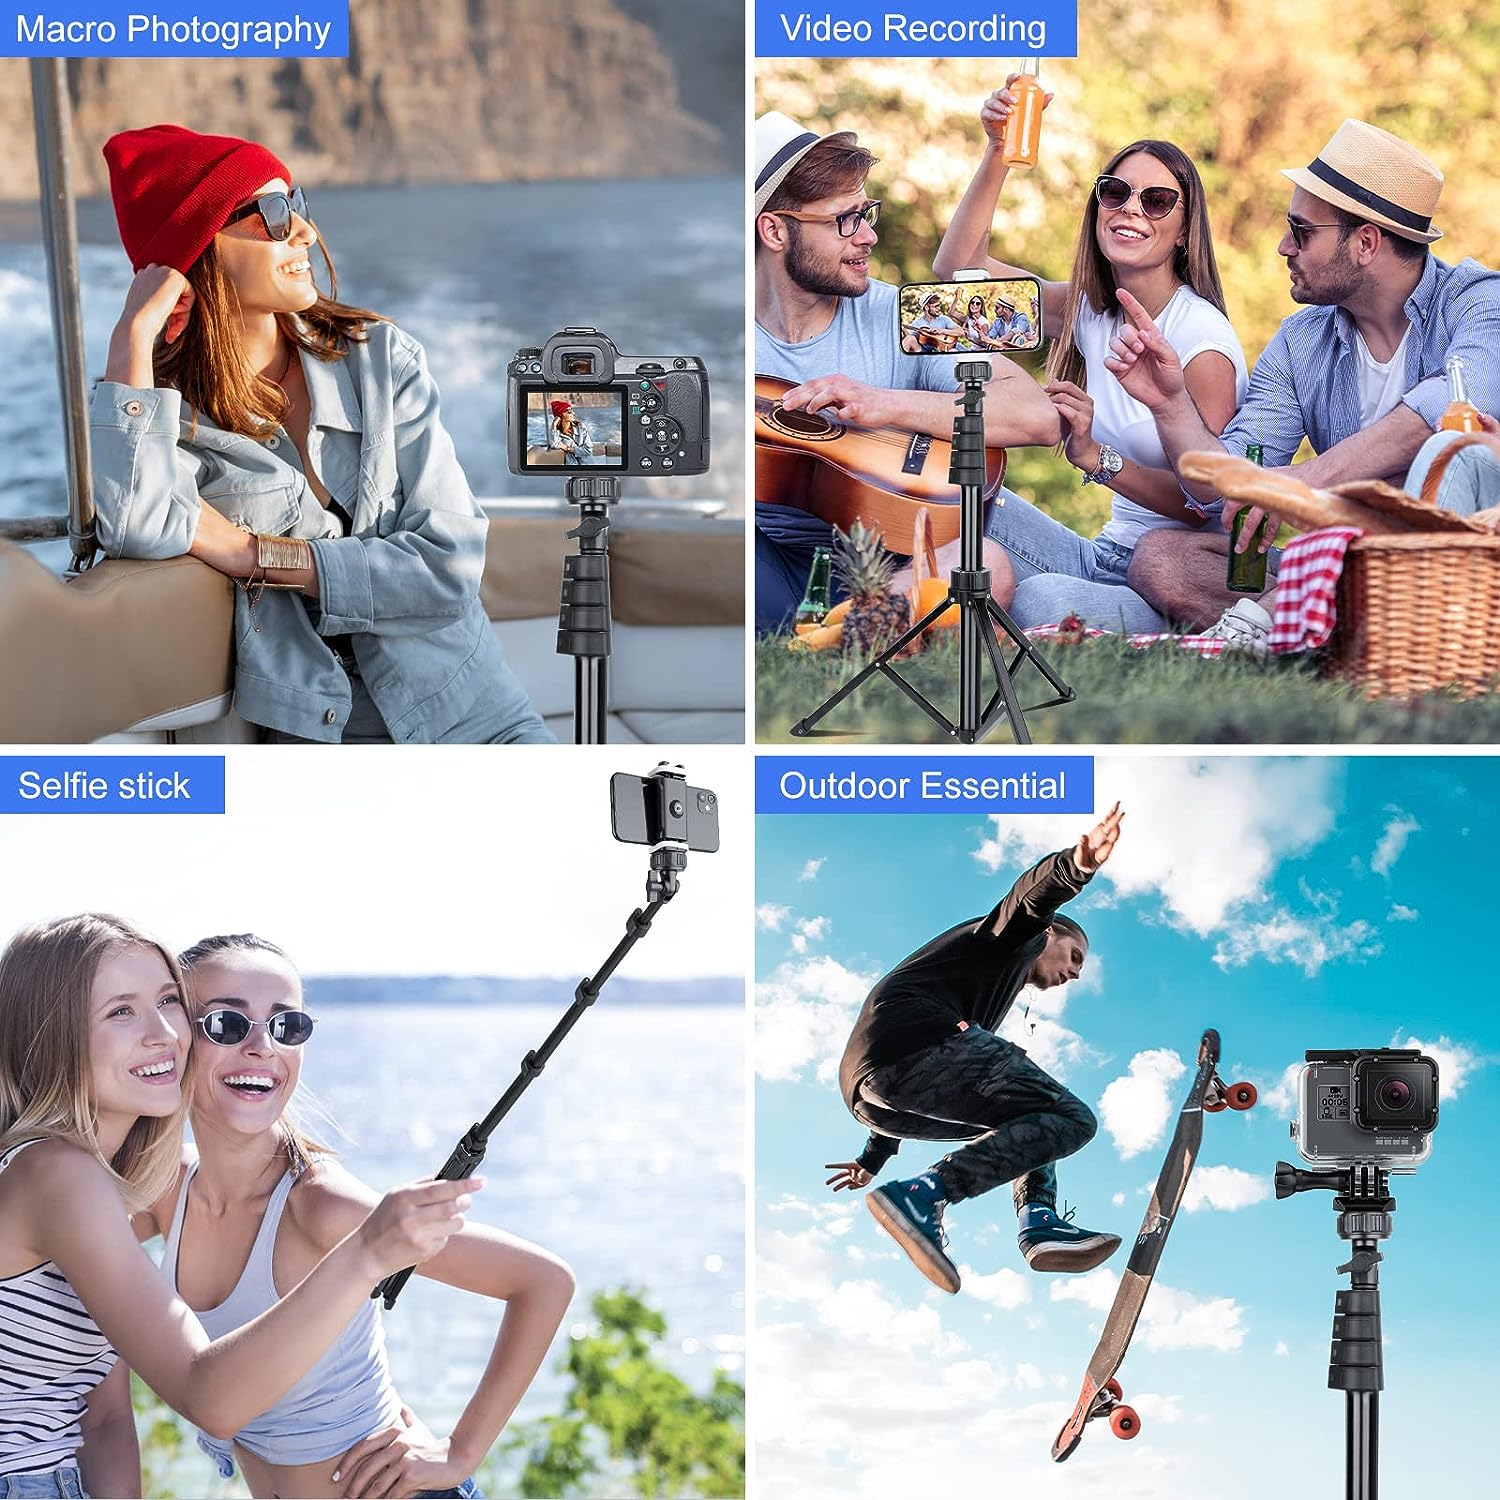 Sensyne 62" Selfie Stick,4 in 1 Professional Selfie Stick Tripod with Wireless Remote and Phone Holder, Phone Tripod with 1/4 Screw Compatible with iPhone Android Phone, Camera